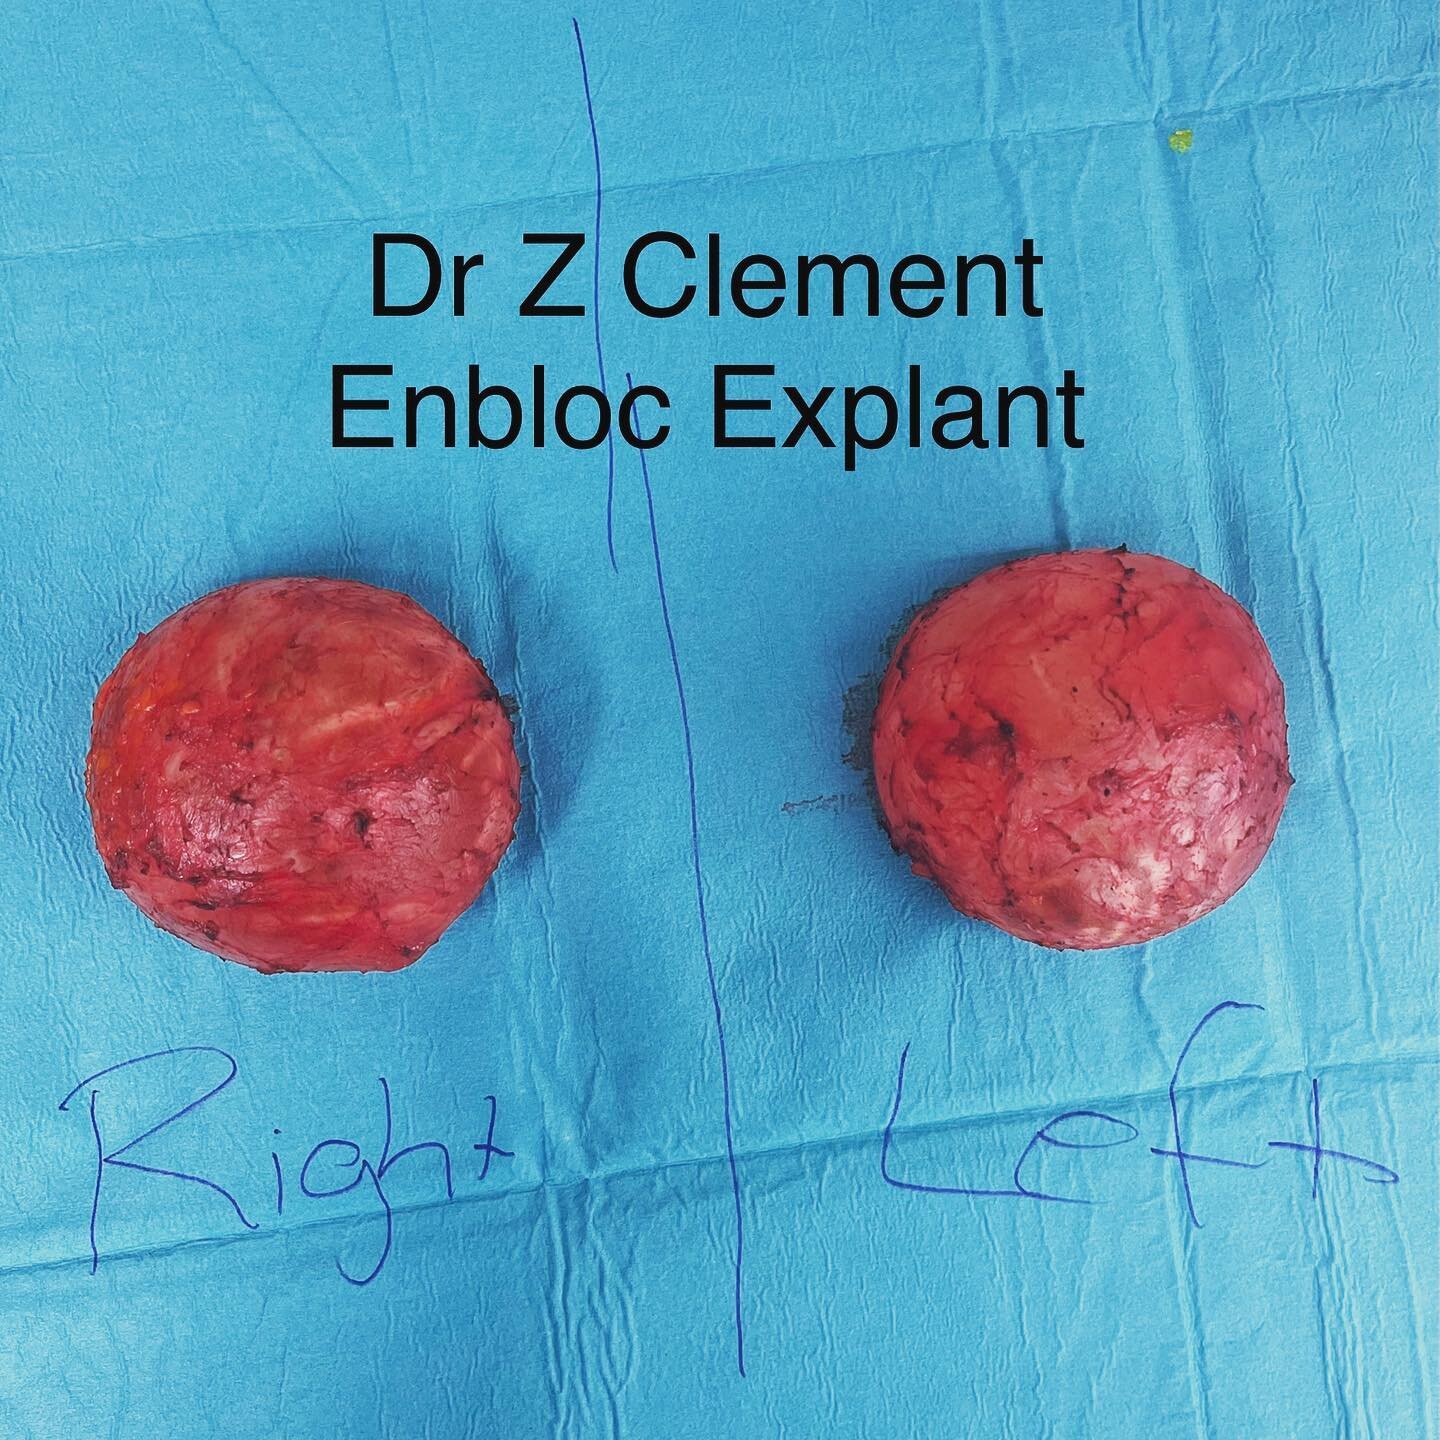 Enbloc explant takes time! It requires careful meticulous dissection saving your natural breast tissue and remove absolutely only the scar tissue! 

#breastimplants #explant #rupturedbreastimplants #explantsurgery #enbloccapsulectomy #breastimplantre